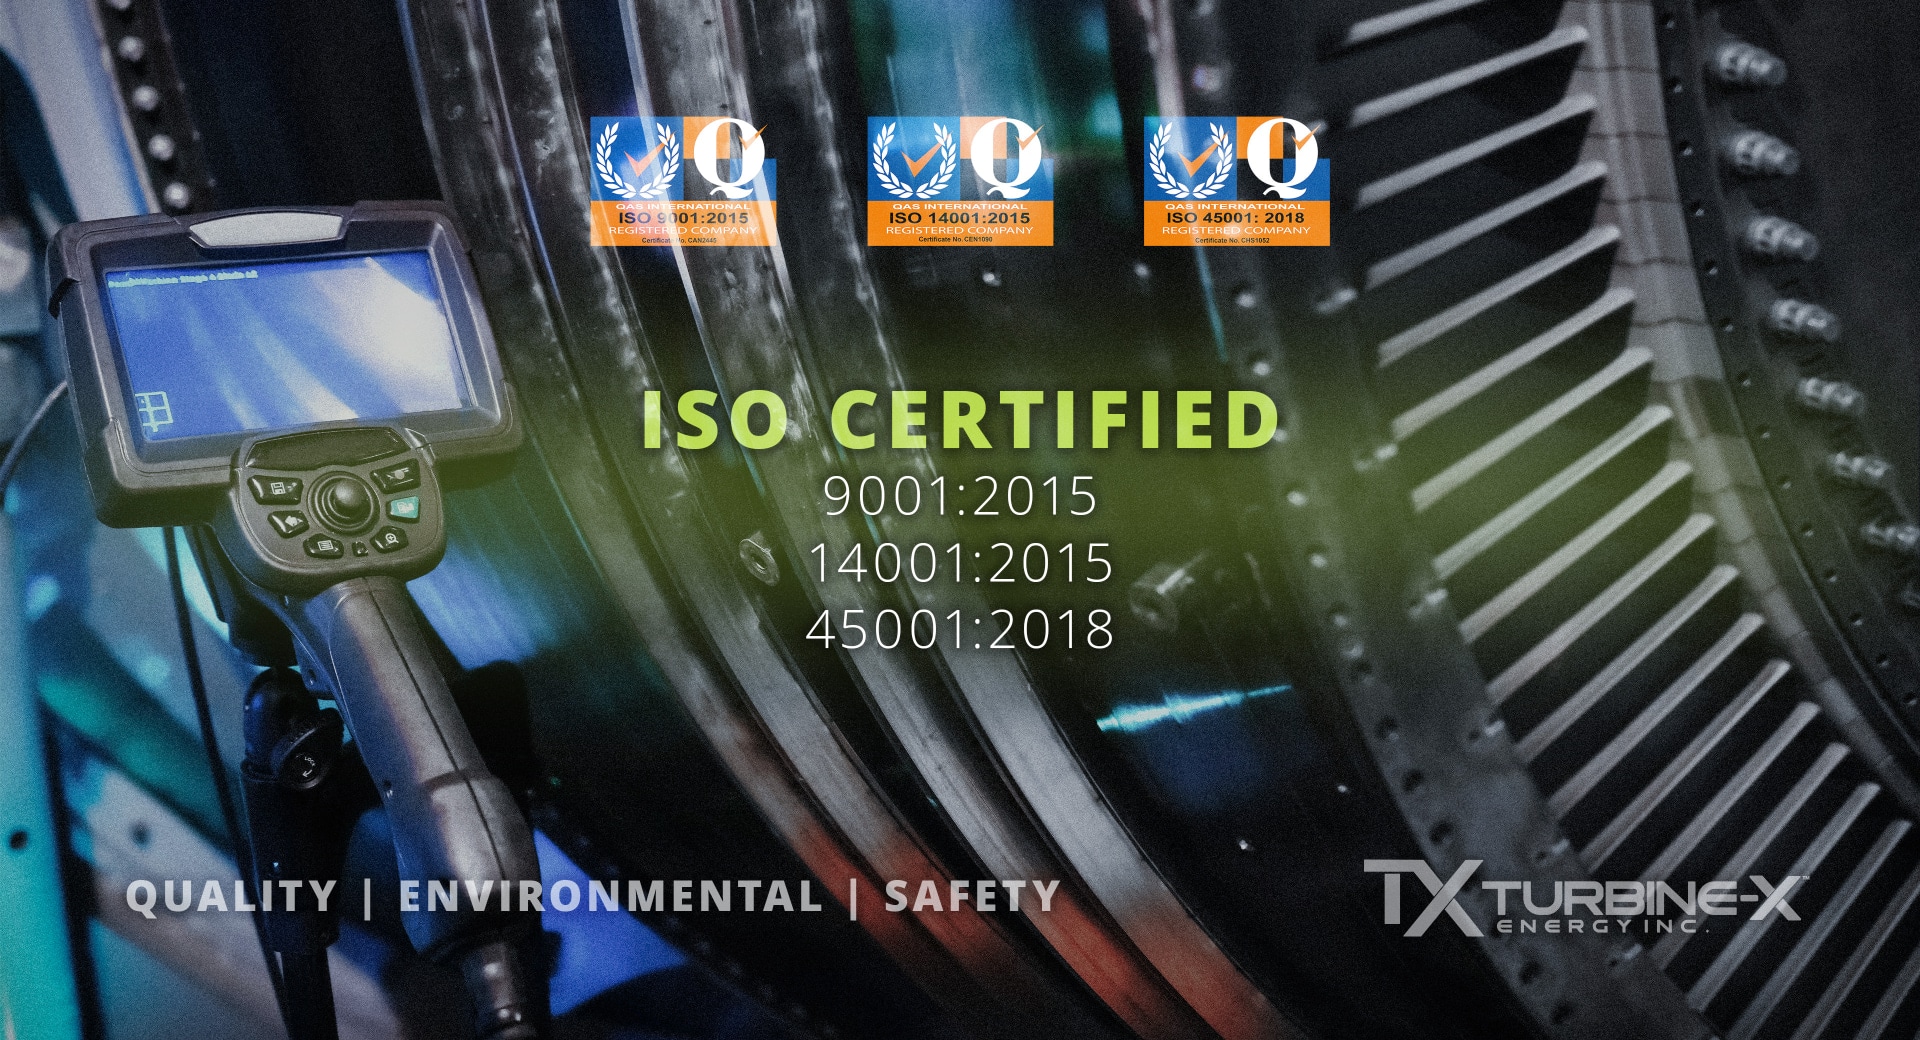 ISO Certified Quality, Environmental, and Safety Management Systems